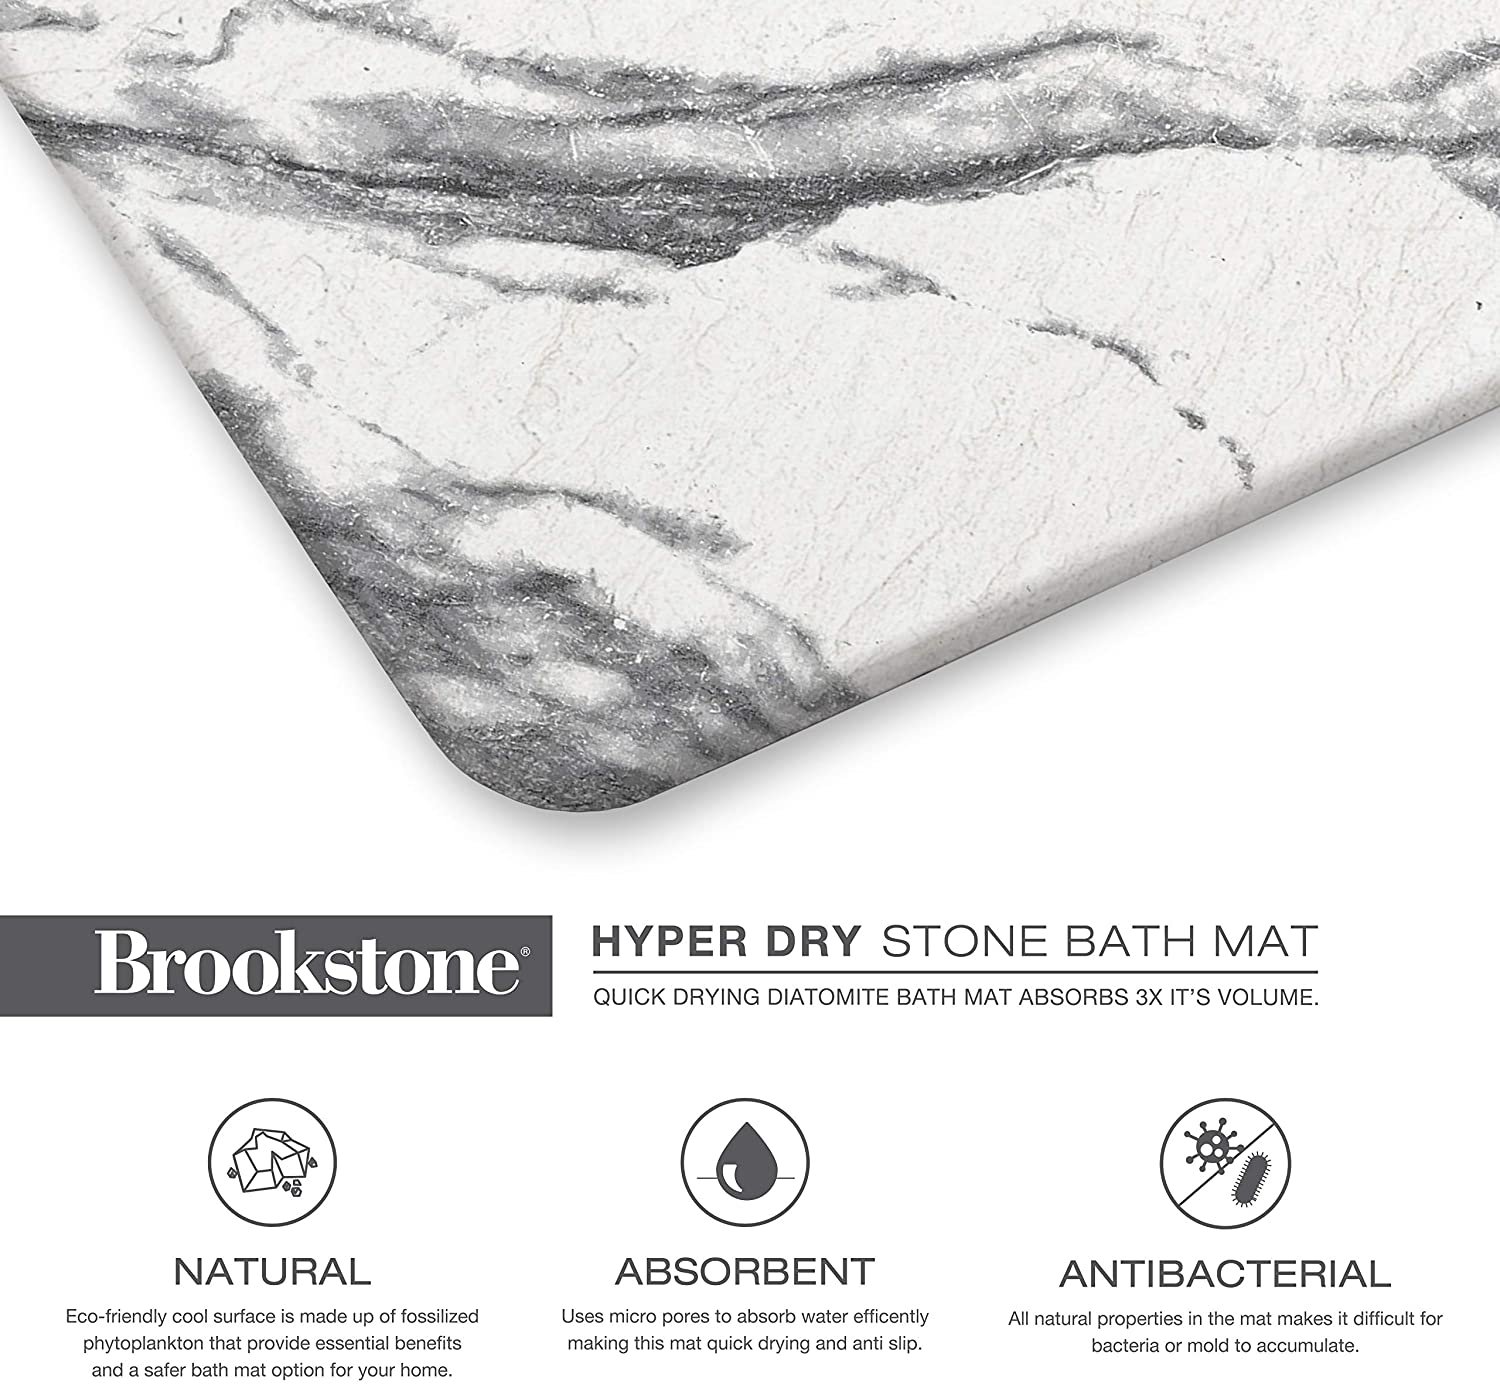 Brookstone Hyper Dry Absorbent Stone Bath Mat - Instant Drying Eco-Friendly  Diatomaceous Earth Bath Mat - Non-Slip and Absorbs 3X Its Volume - 15.3 in